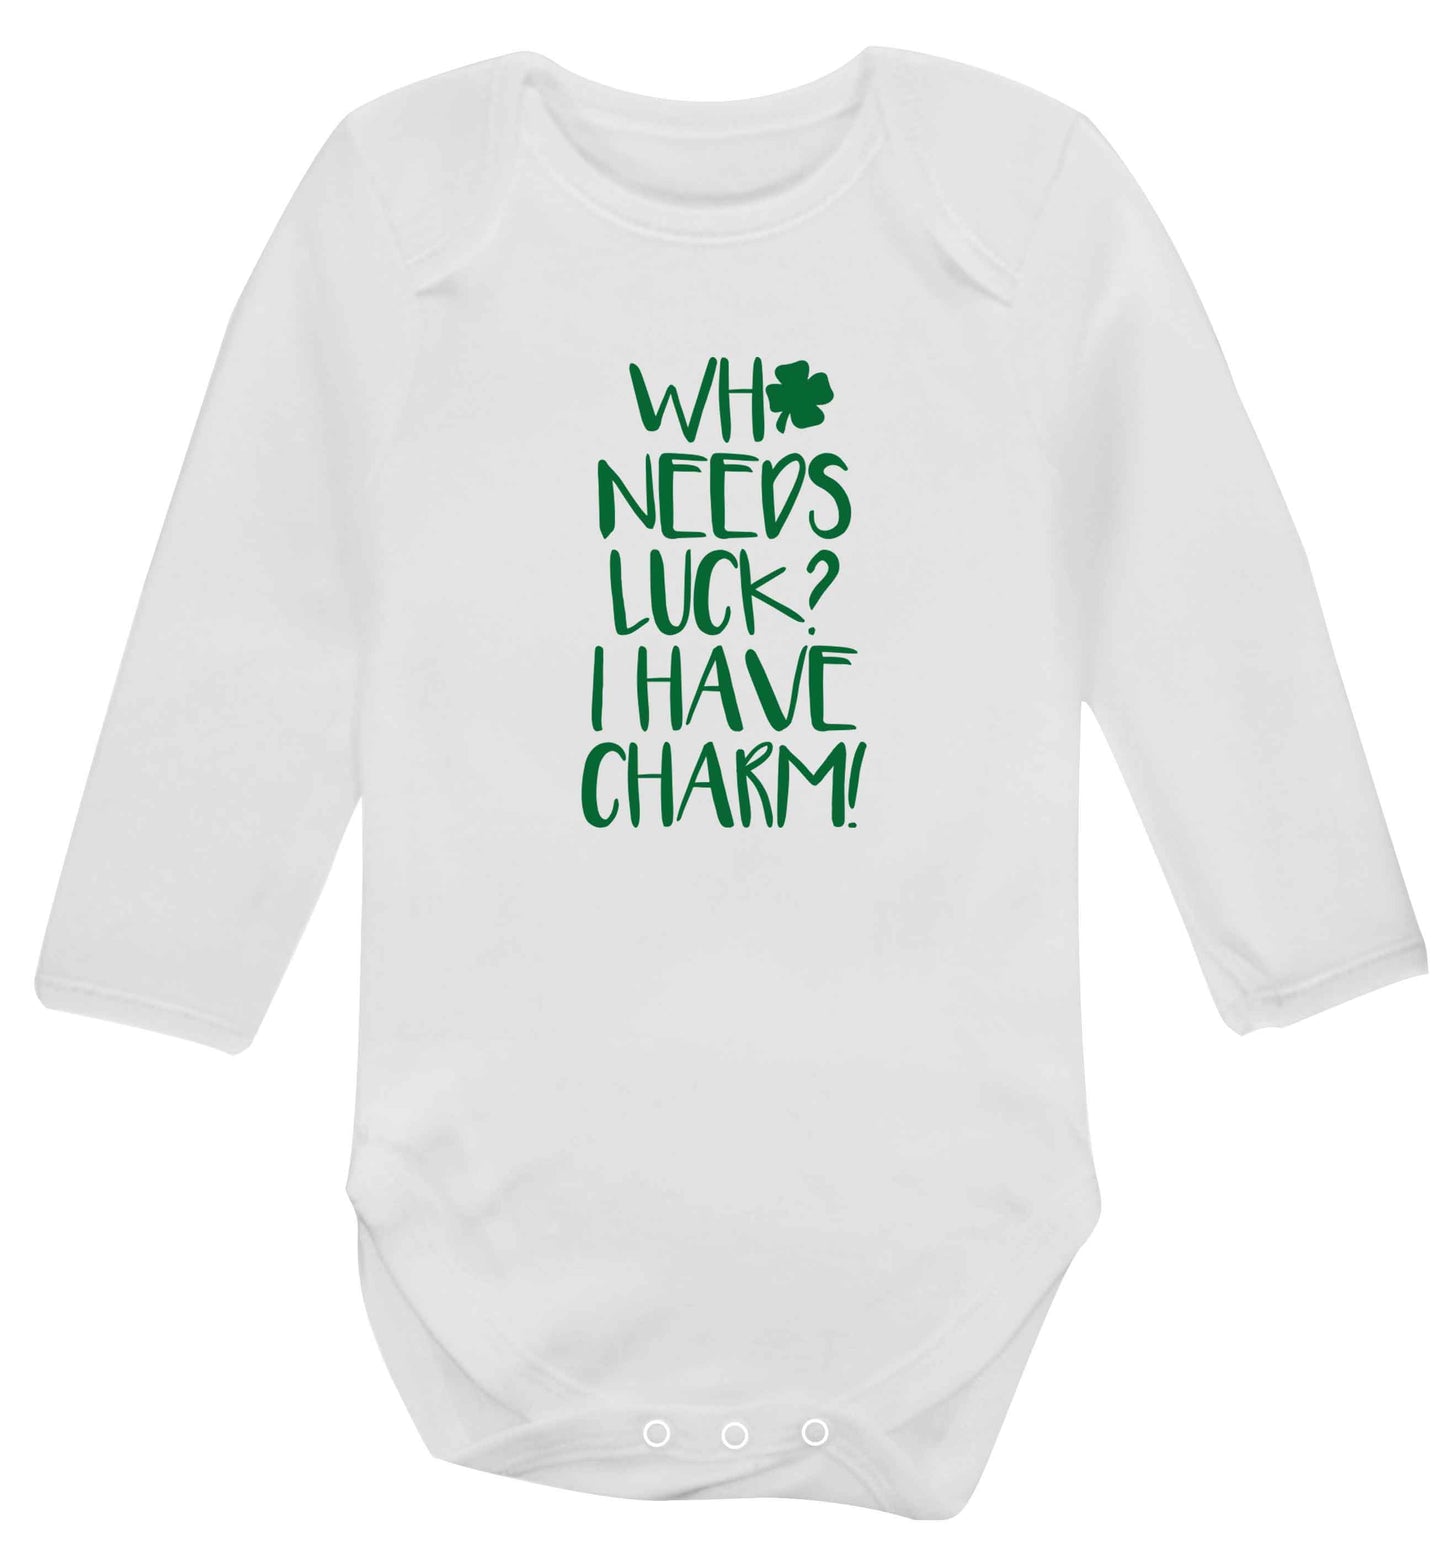 Who needs luck? I have charm! baby vest long sleeved white 6-12 months